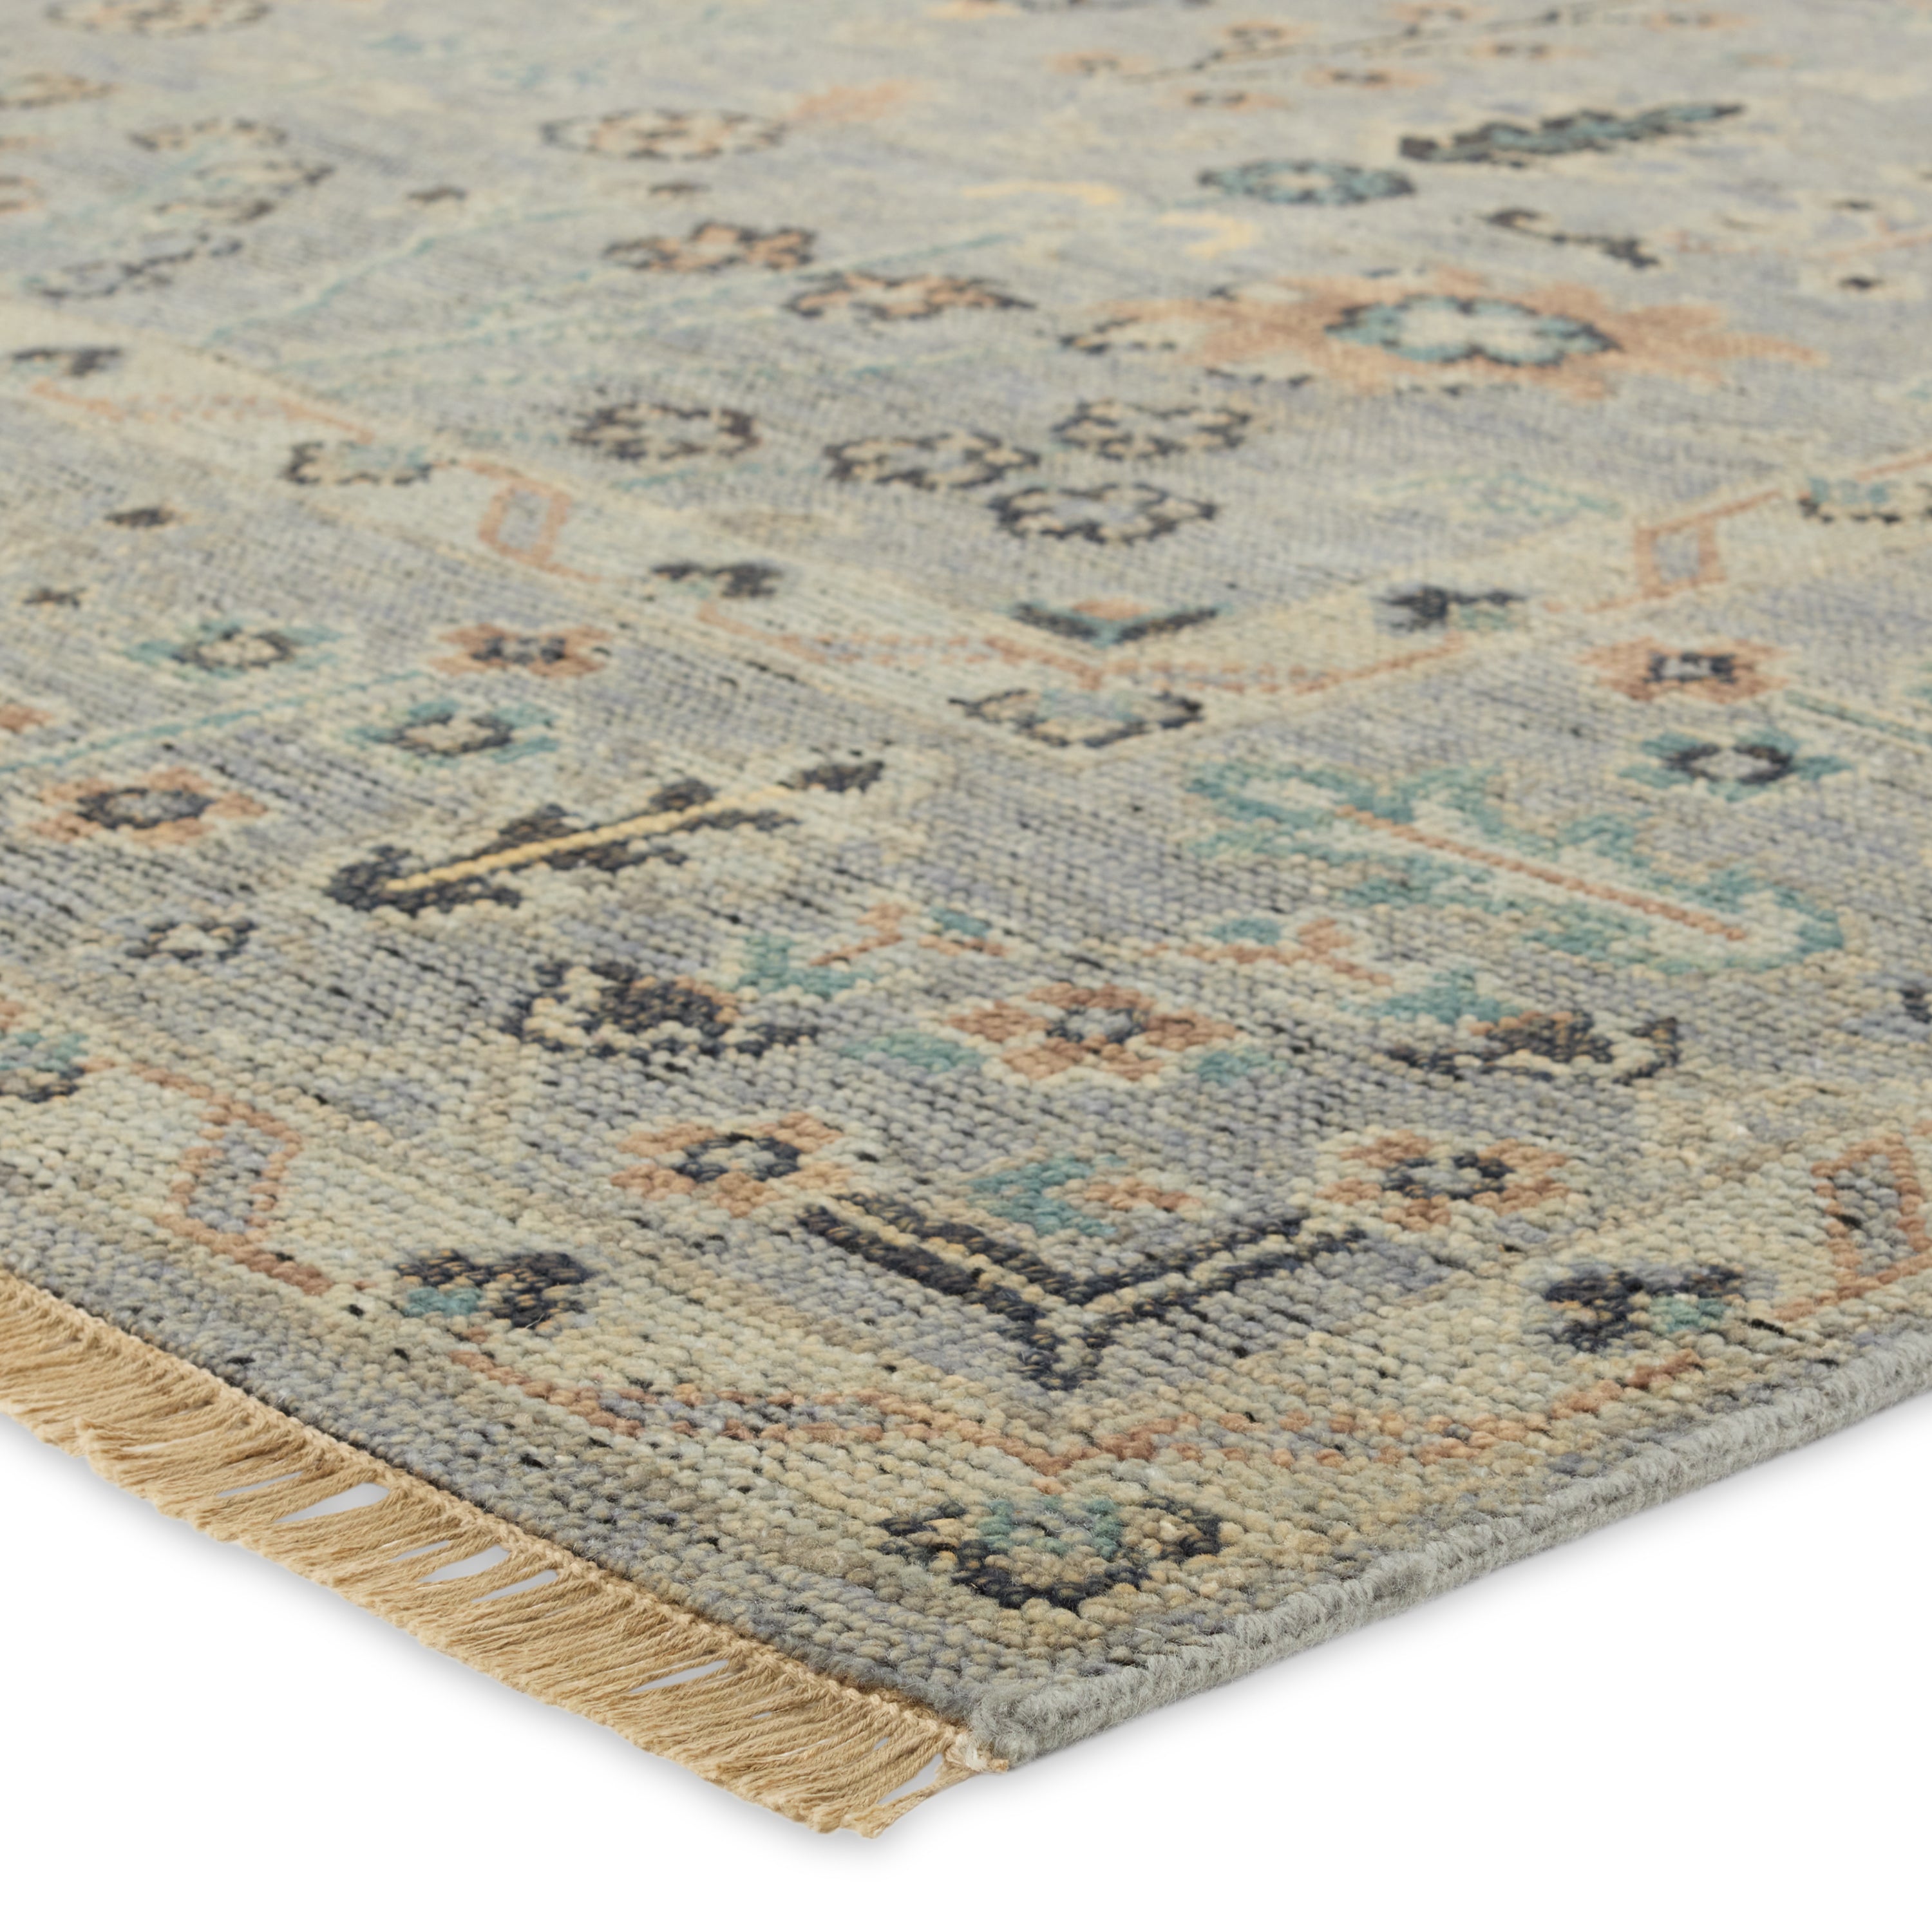 The Rhapsody collection features heirloom-quality designs of stunningly abrashed Old World patterns. The Nysa area rug boasts a beautifully washed floral motif with a decorative border. The blue tone is accented with rich green, tan, navy, and cream hues for added depth and intrigue. This durable wool handknot anchors living spaces with a fresh take on vintage style. Amethyst Home provides interior design, new construction, custom furniture, and area rugs in the Des Moines metro area.